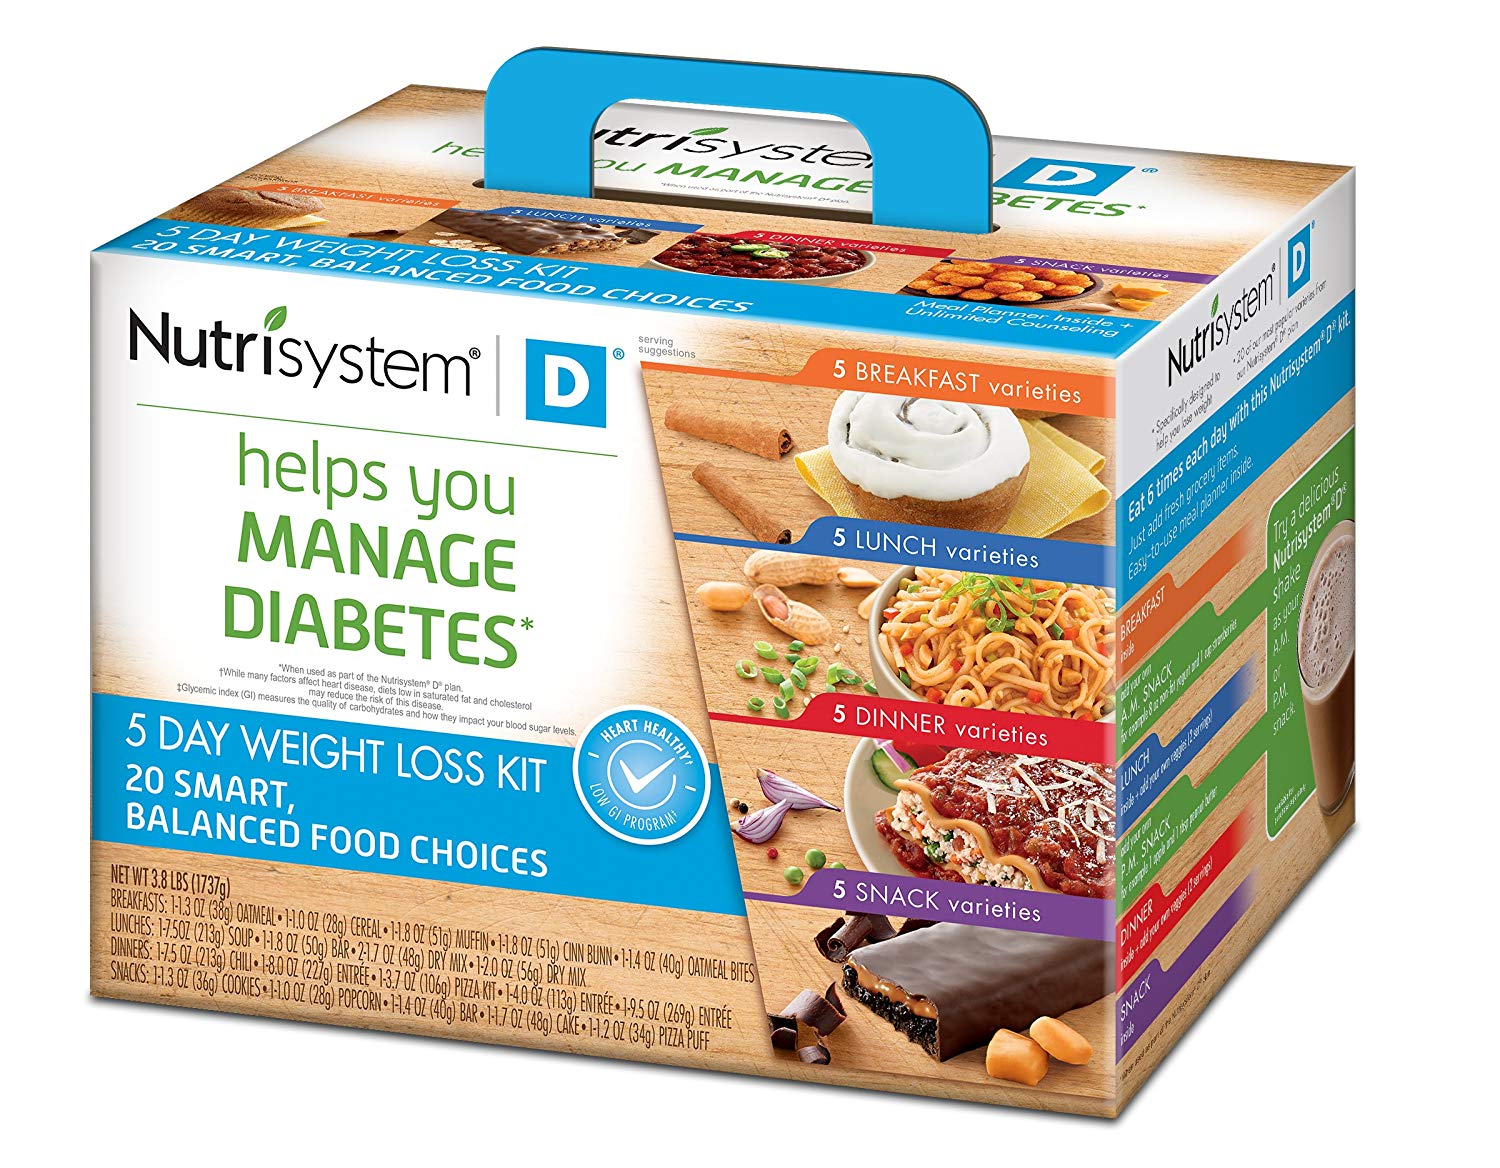 A Complete Guide On Nutrisystem Gluten-Free Diet Foods